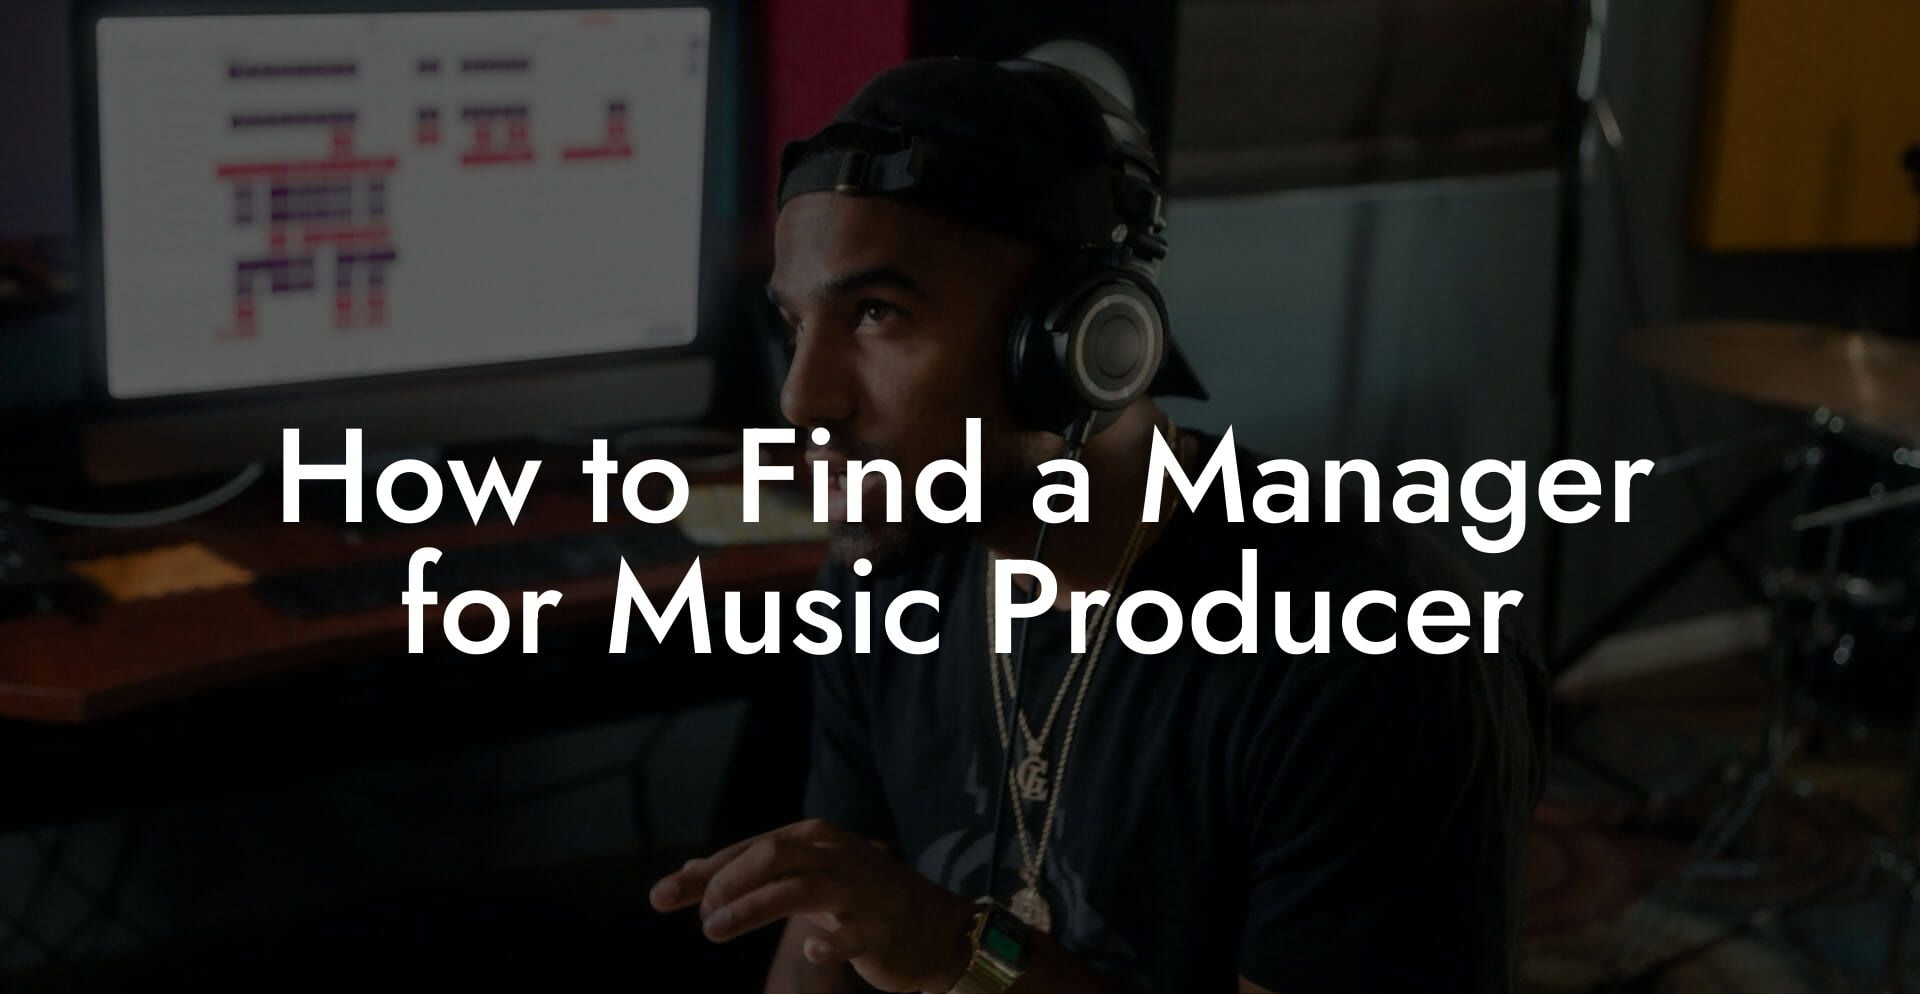 How to Find a Manager for Music Producer